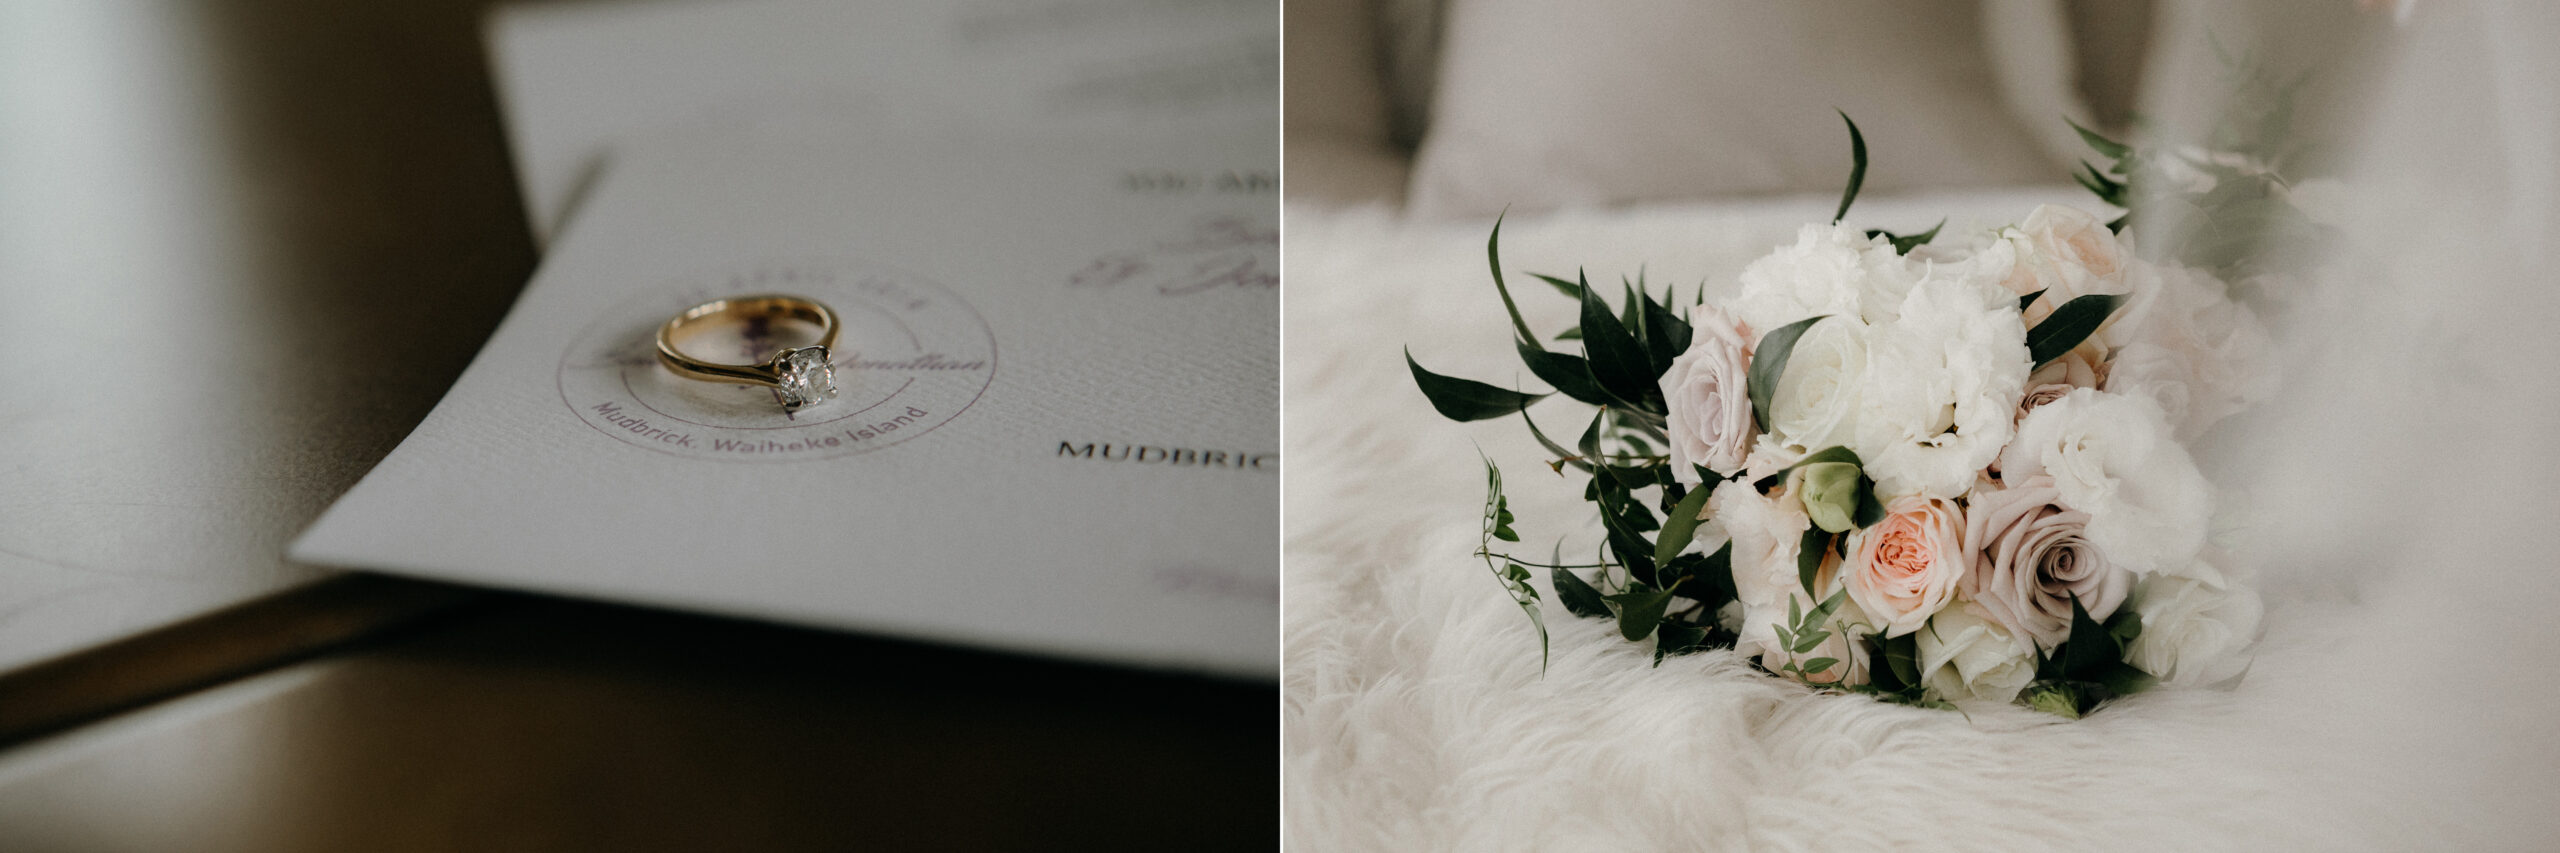 Brides engagement ring on wedding invitation and flower bouquet on bed at Mudbrick Lodge on Waiheke Island Auckland, photo by Sarah Weber Photography